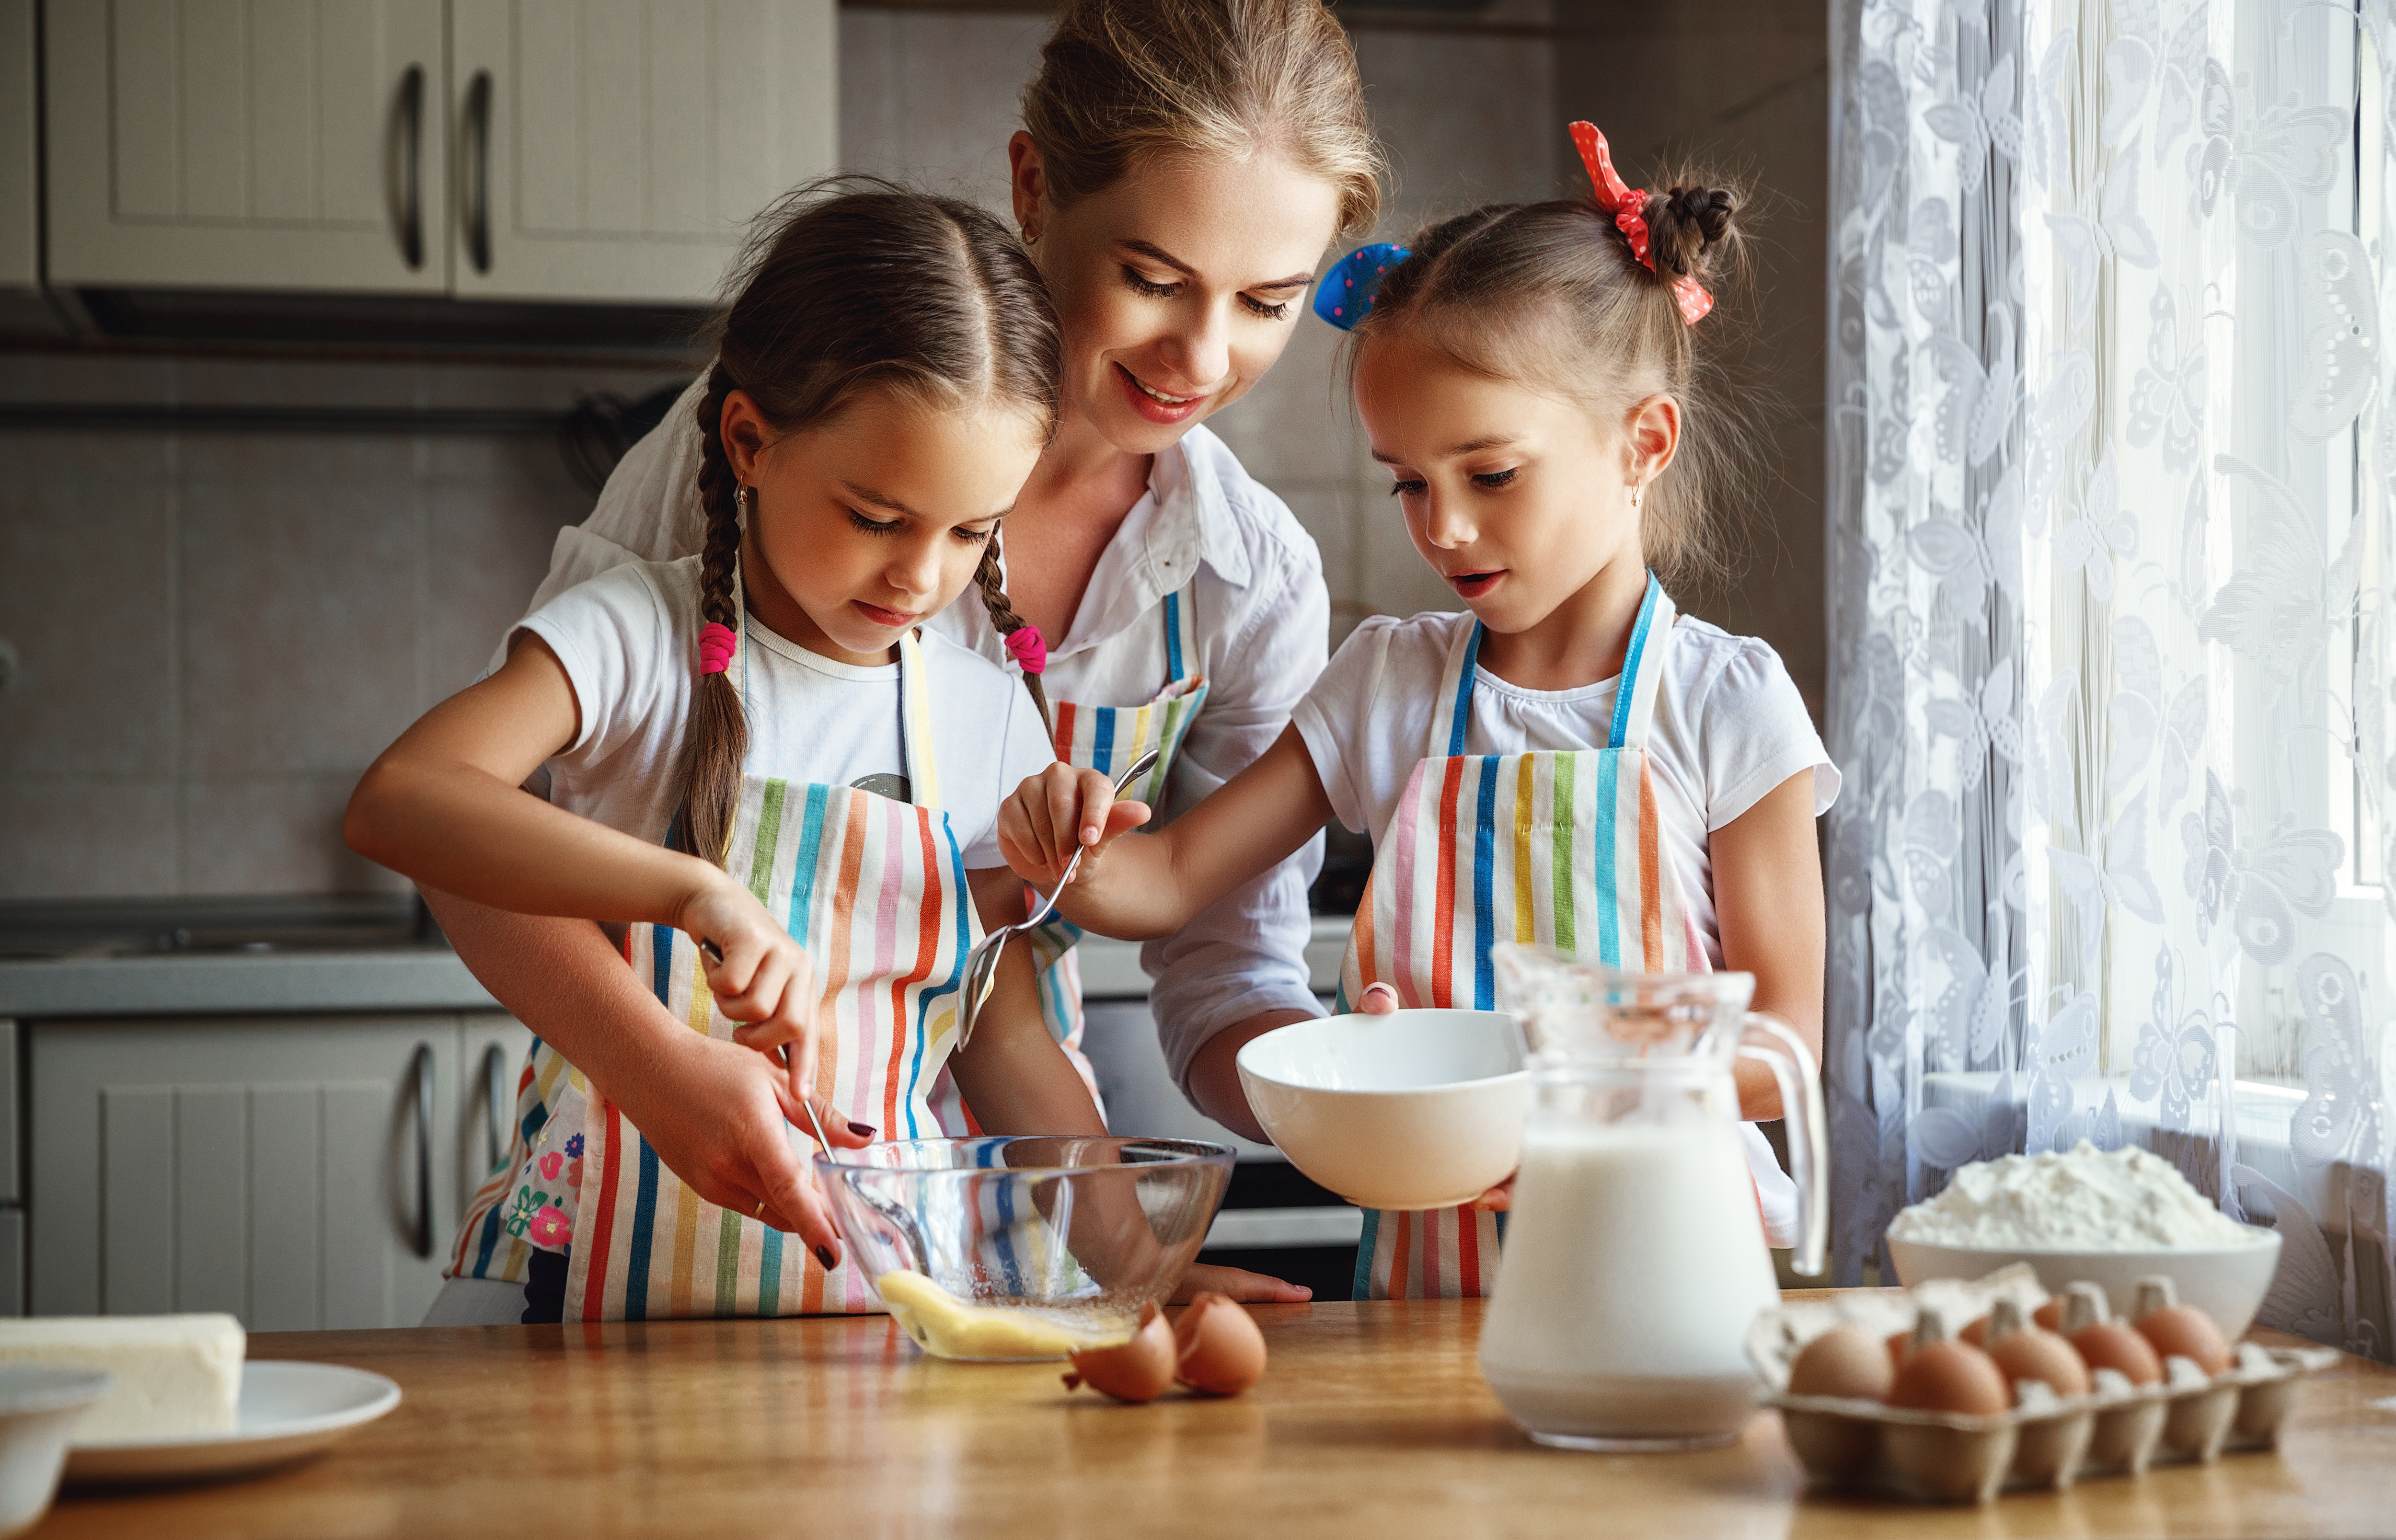 A mother with her two daughters baking cakes in their kitchen